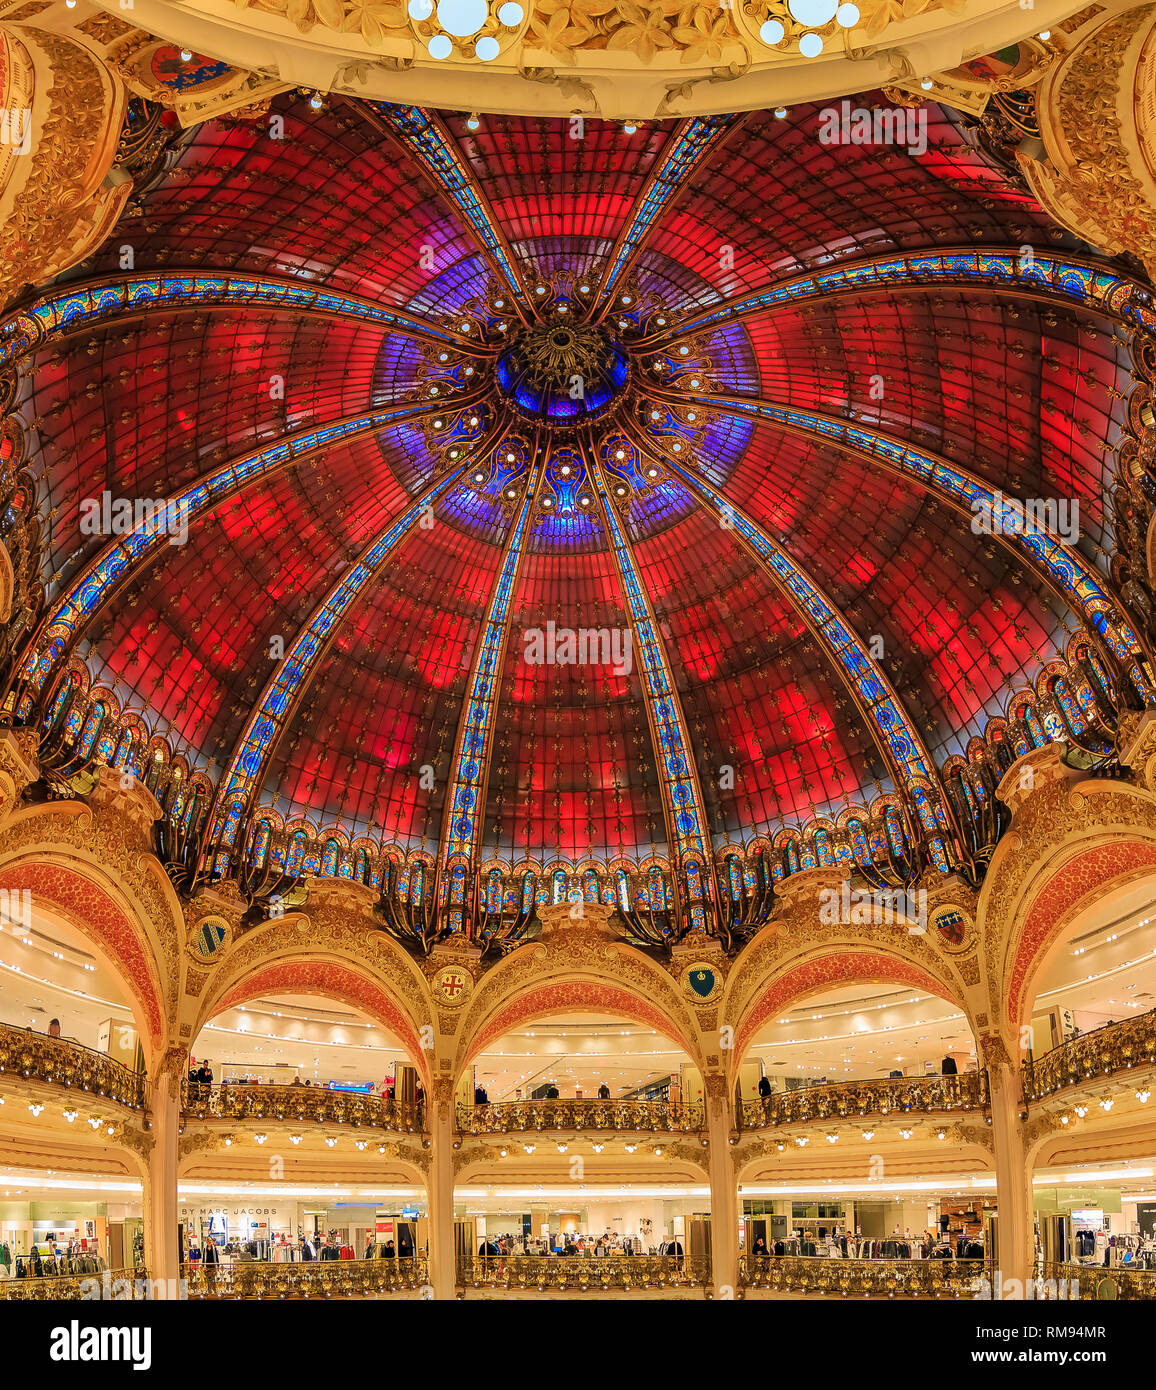 Art Nouveau decor and stained glass dome windows of the flagship Galeries Lafayette iconic French department store in Paris France Stock Photo